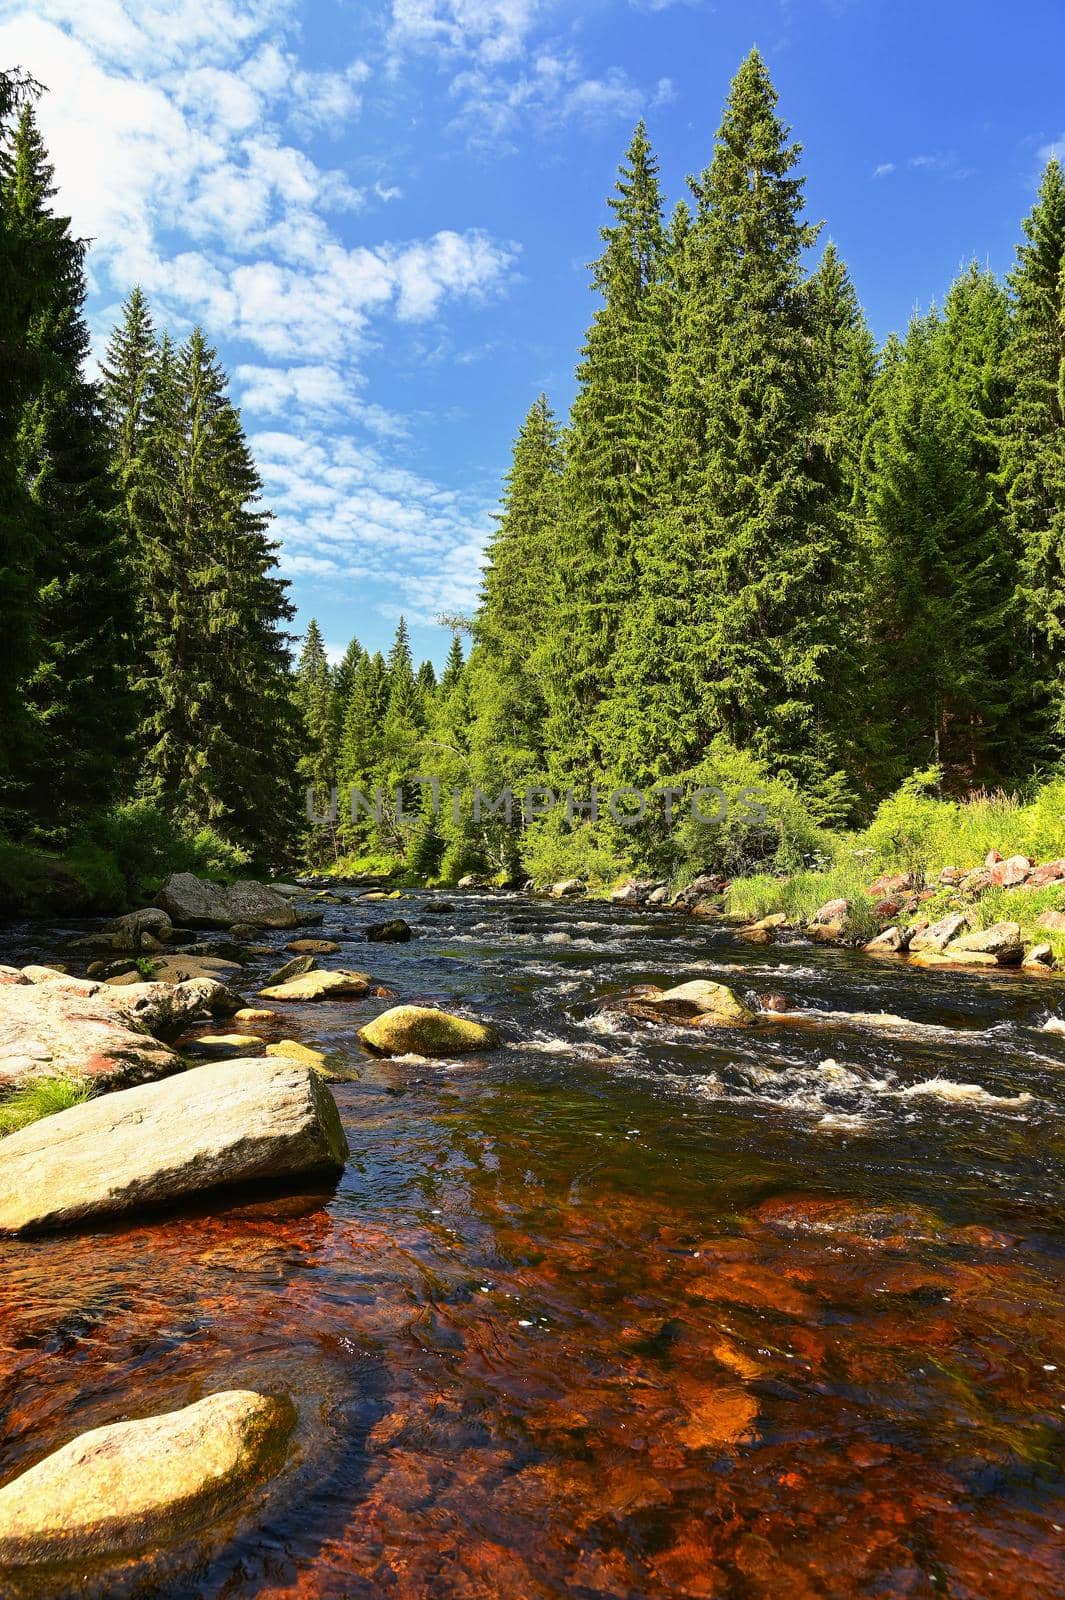 Beautiful river with stones and trees in the mountains with forest. Nature - landscape. Background with blue sky and sun - Vydra river in Sumava, Czech Republic. by Montypeter